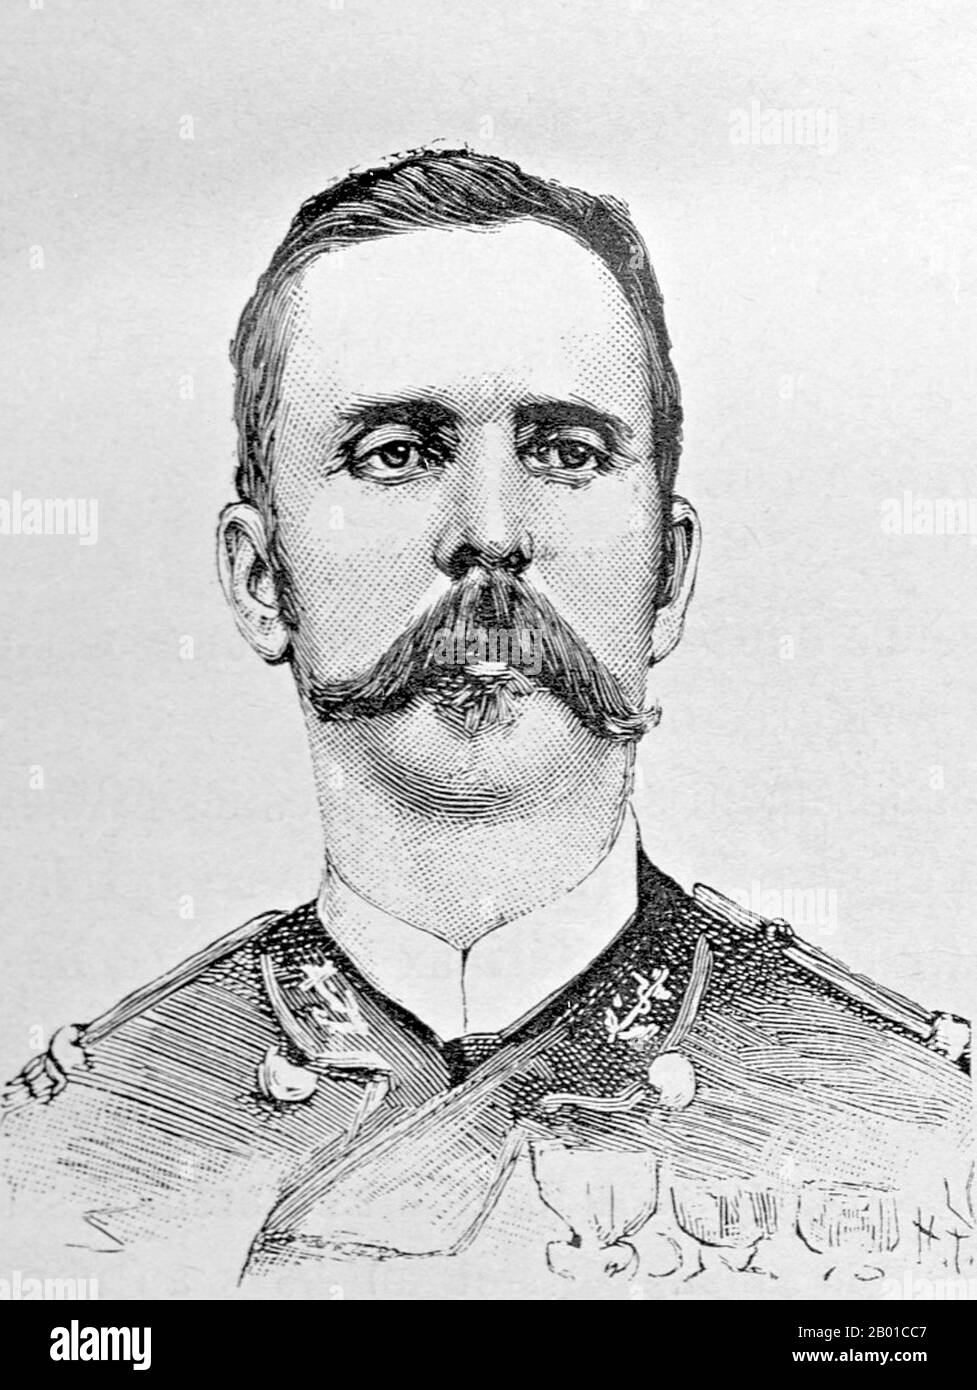 Vietnam: Lieutenant-Colonel Carreau, mortally wounded at the Capture of Nam Dinh, 27 March 1883. Lithograph portrait by Charles-Lucien Huard (12 February 1837 - 22 January 1899), 1887.  The Tonkin Campaign (French: Campagne du Tonkin) was an armed conflict fought between June 1883 and April 1886 by the French against, variously, the Vietnamese, Liu Yongfu's Black Flag Army and the Chinese Guangxi and Yunnan armies to occupy Tonkin (northern Vietnam) and entrench a French protectorate there. Stock Photo